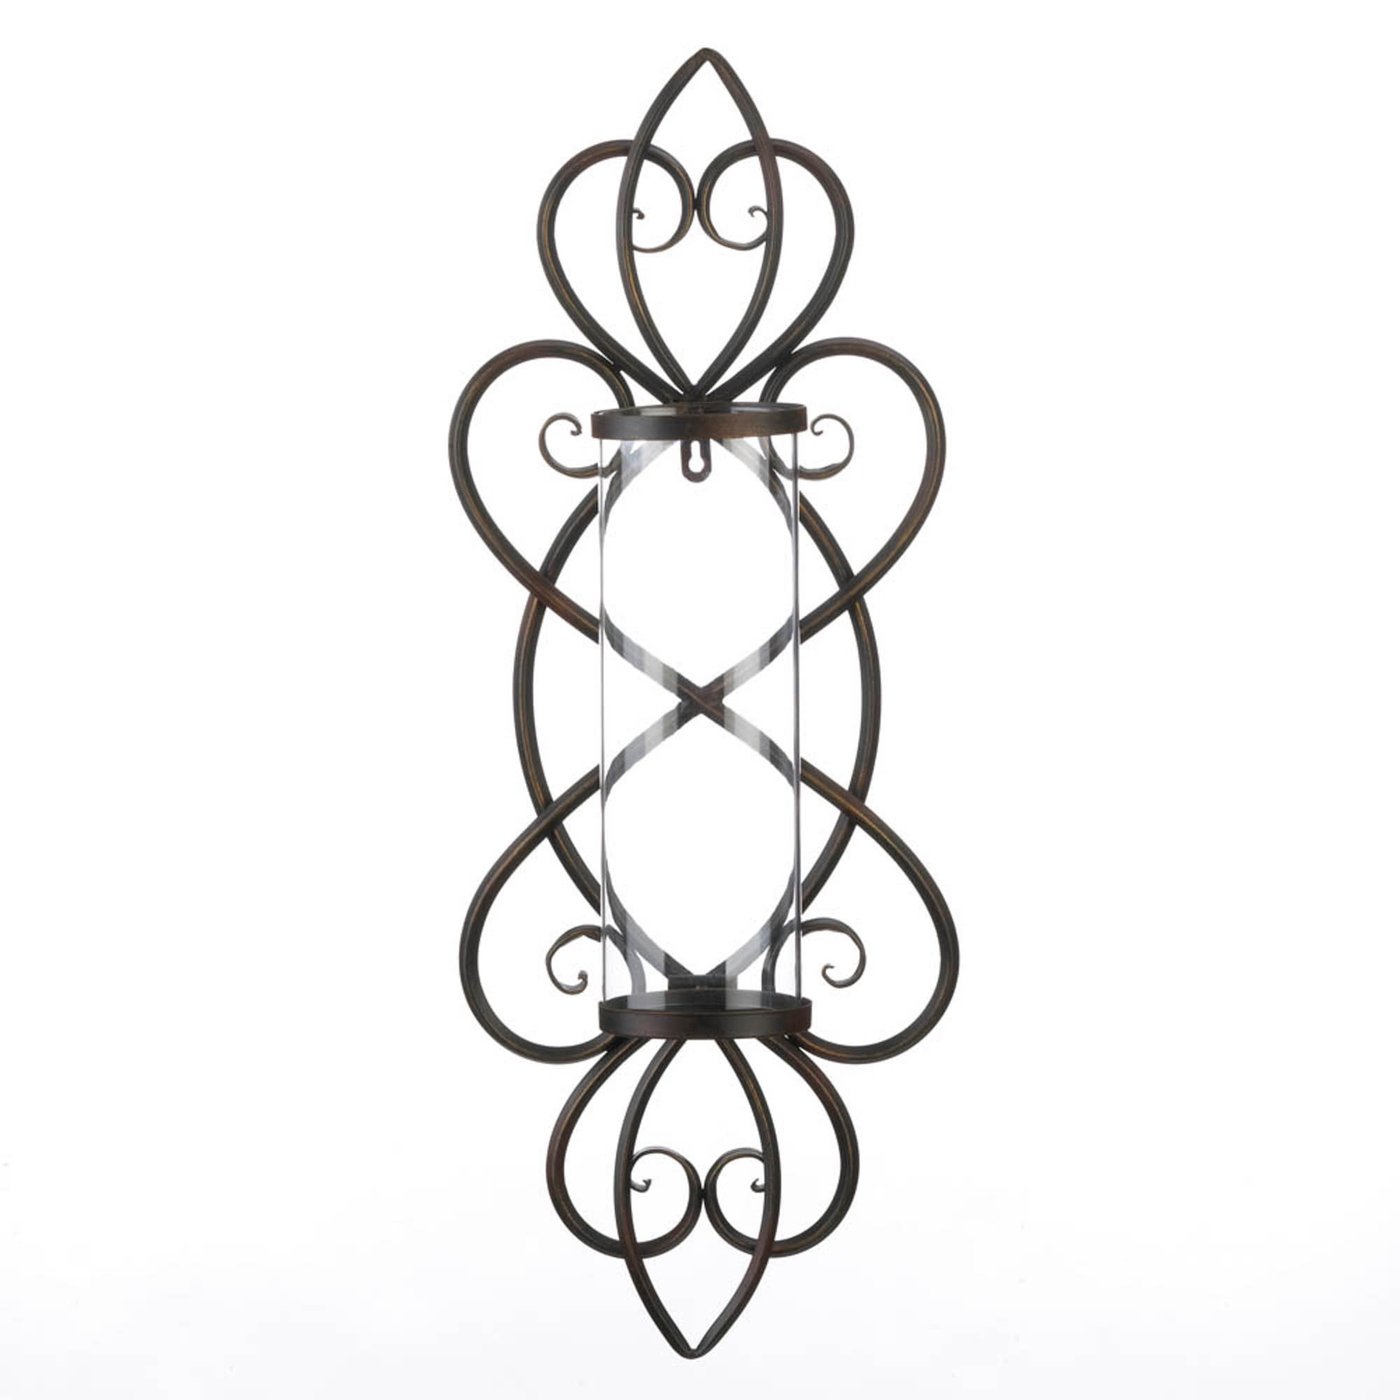 HEART SHAPED CANDLE WALL SCONCE